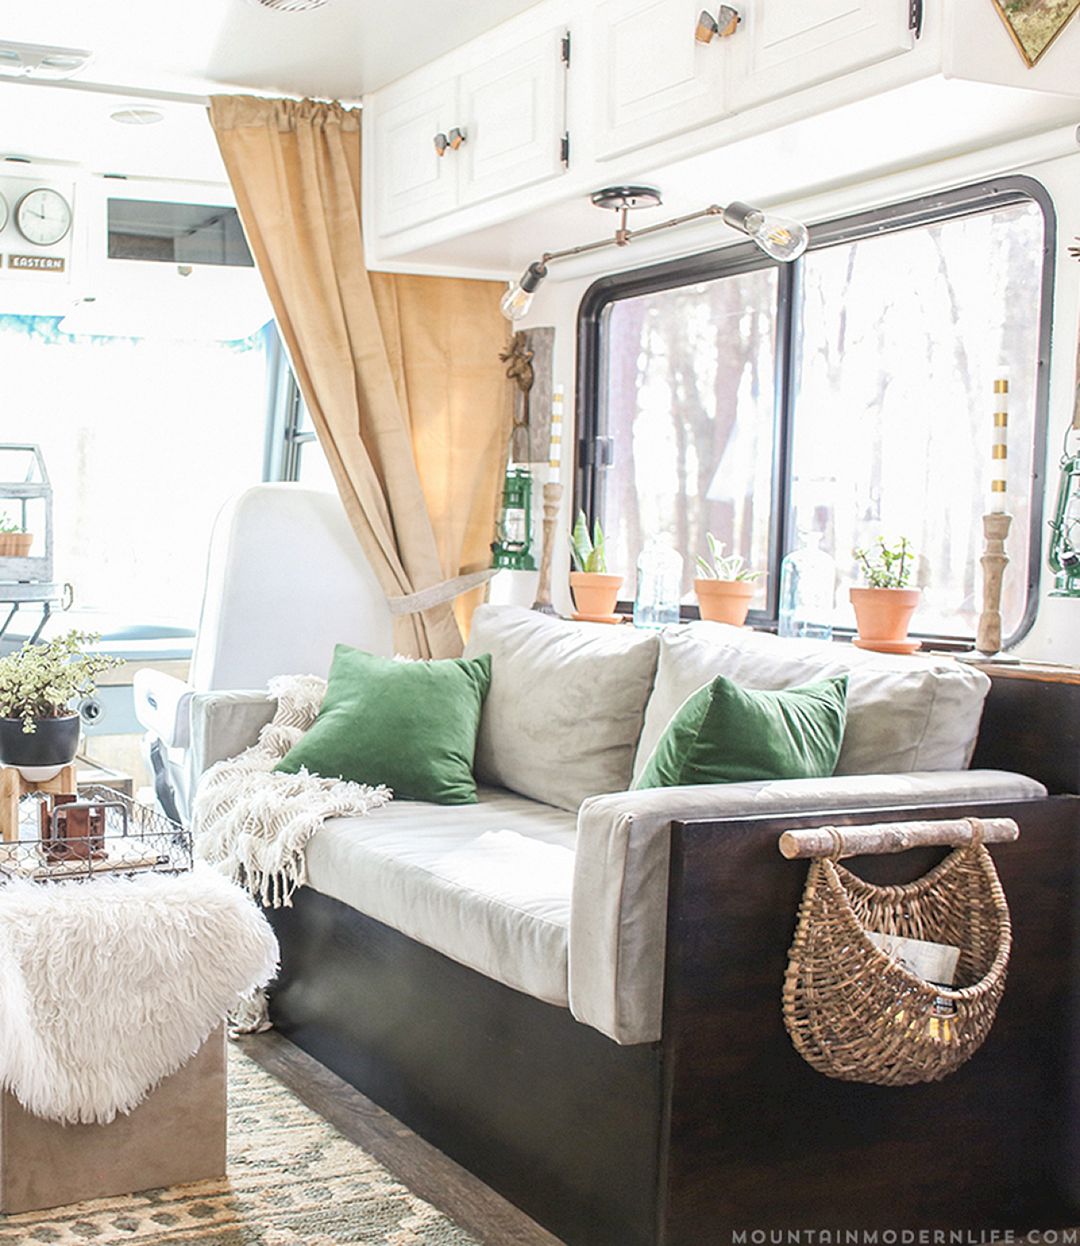 Top RV Remodel and Hack Ideas